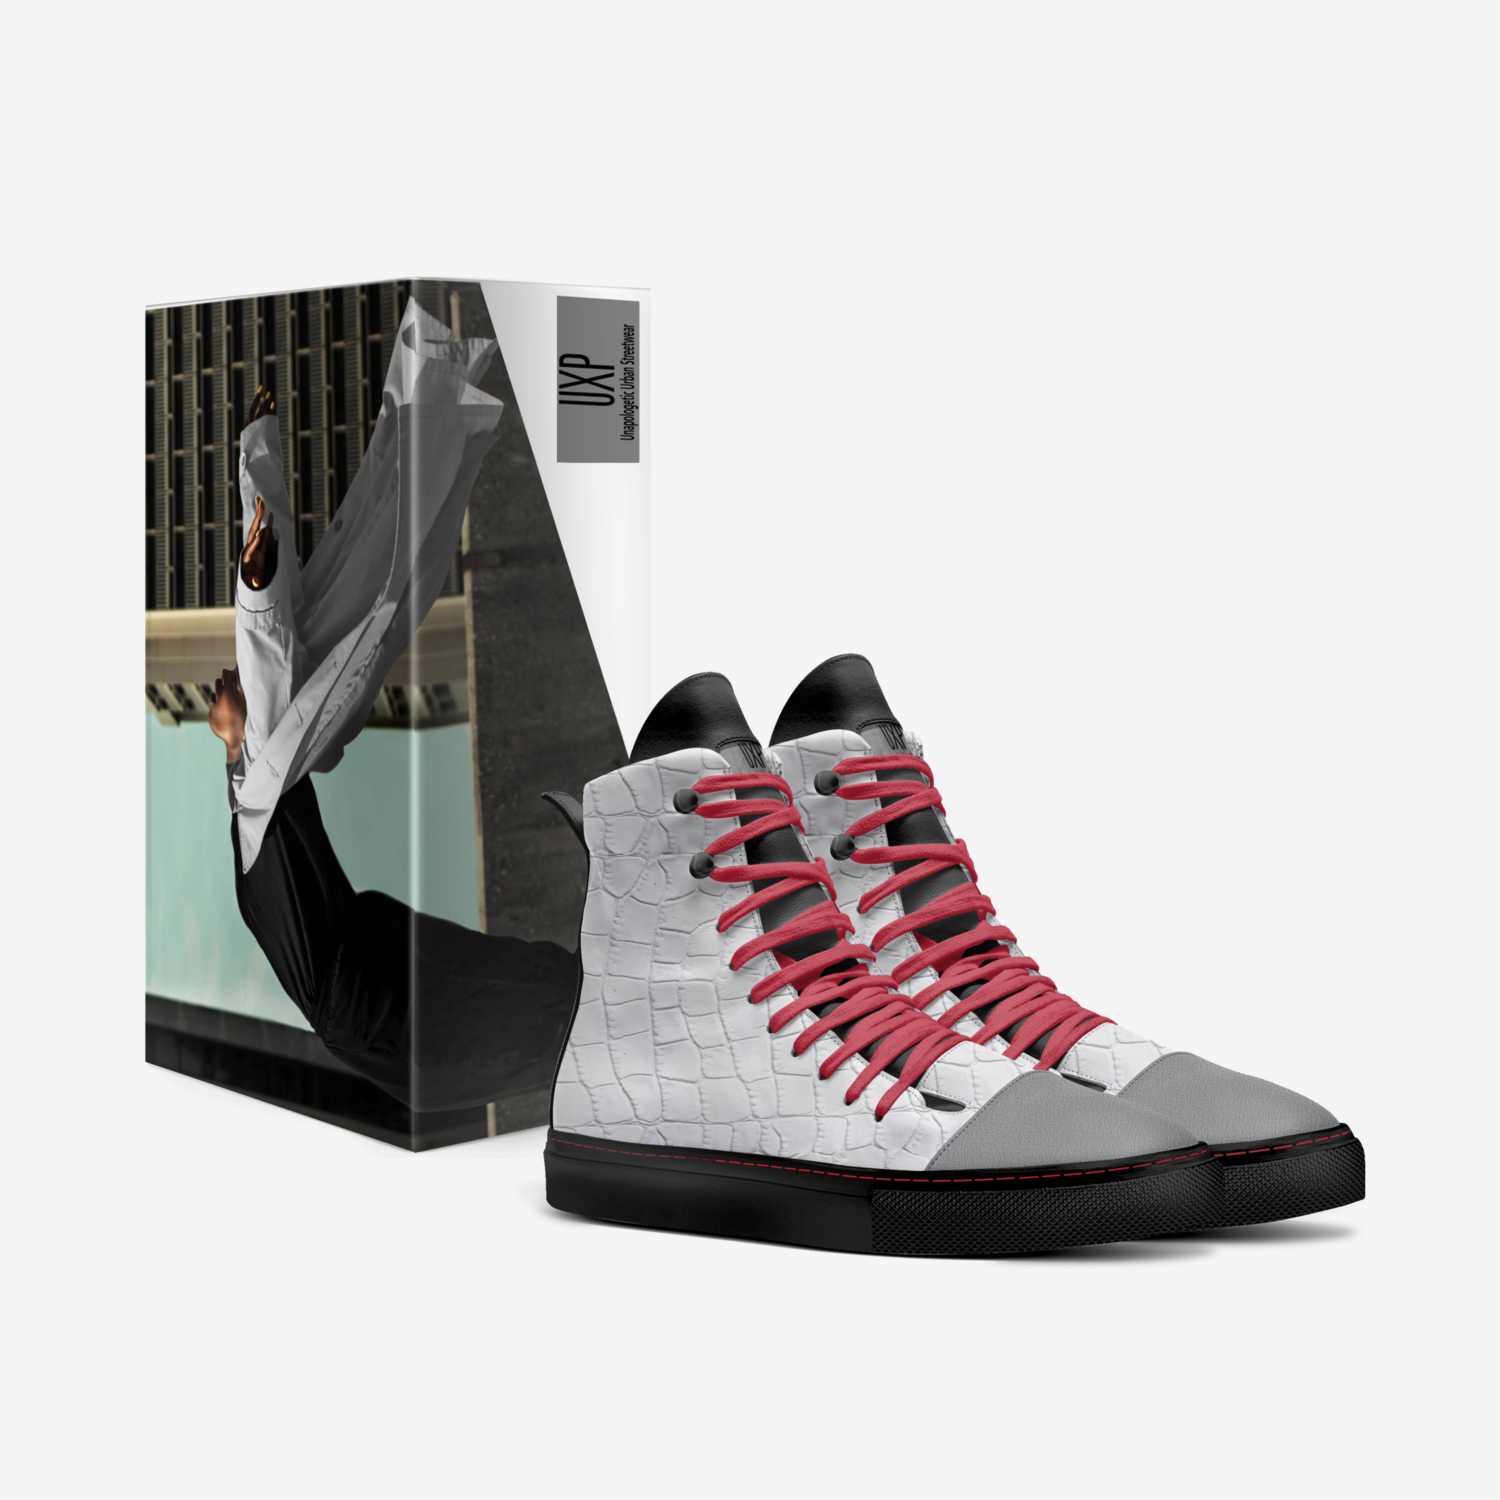 UXP custom made in Italy shoes by Grayson Slink | Box view